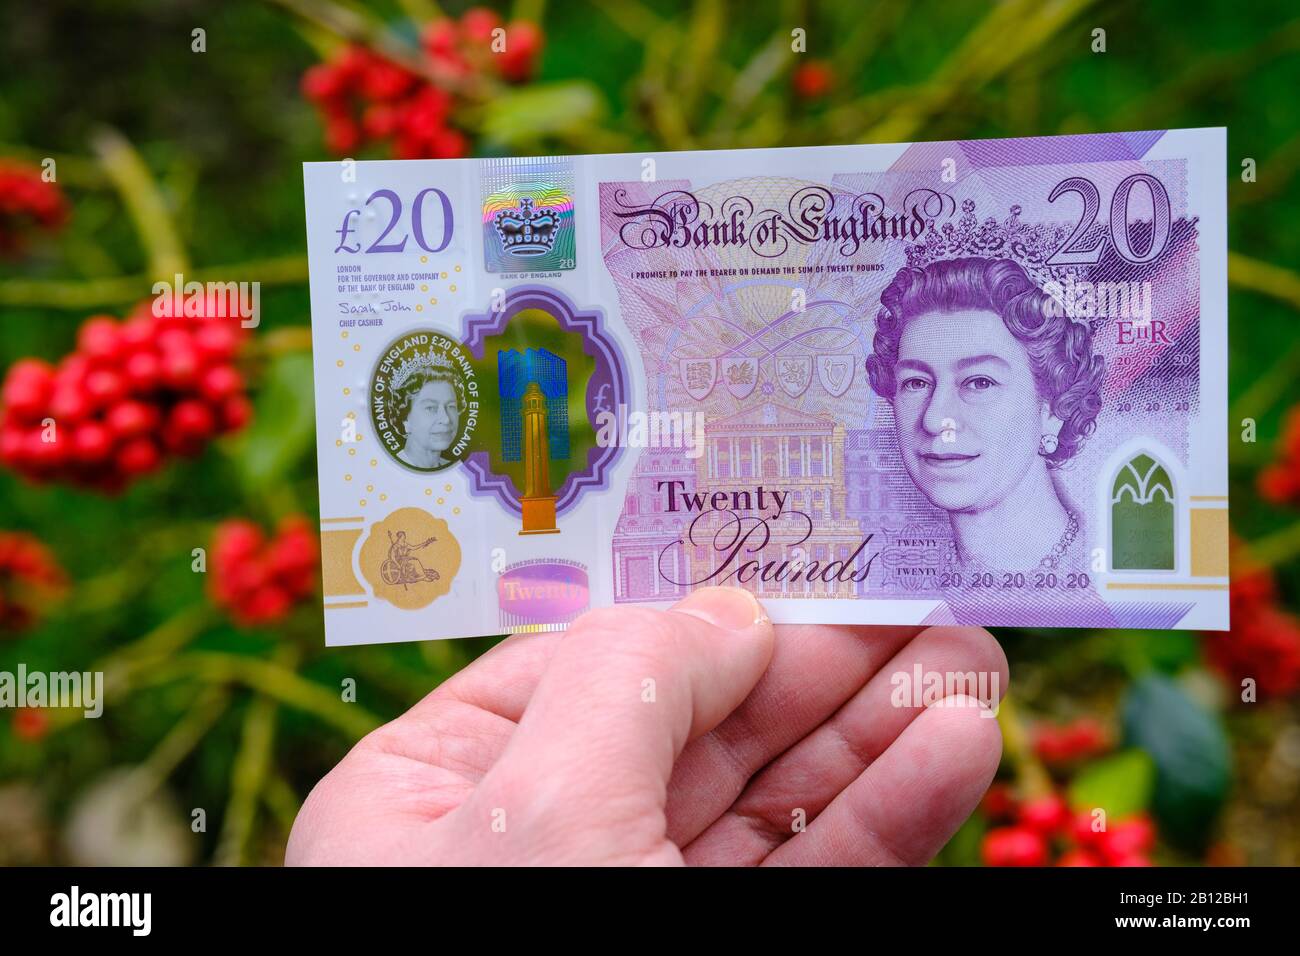 New British 20 pound polymer banknote released in February 2020 in the United Kingdom. Stock Photo